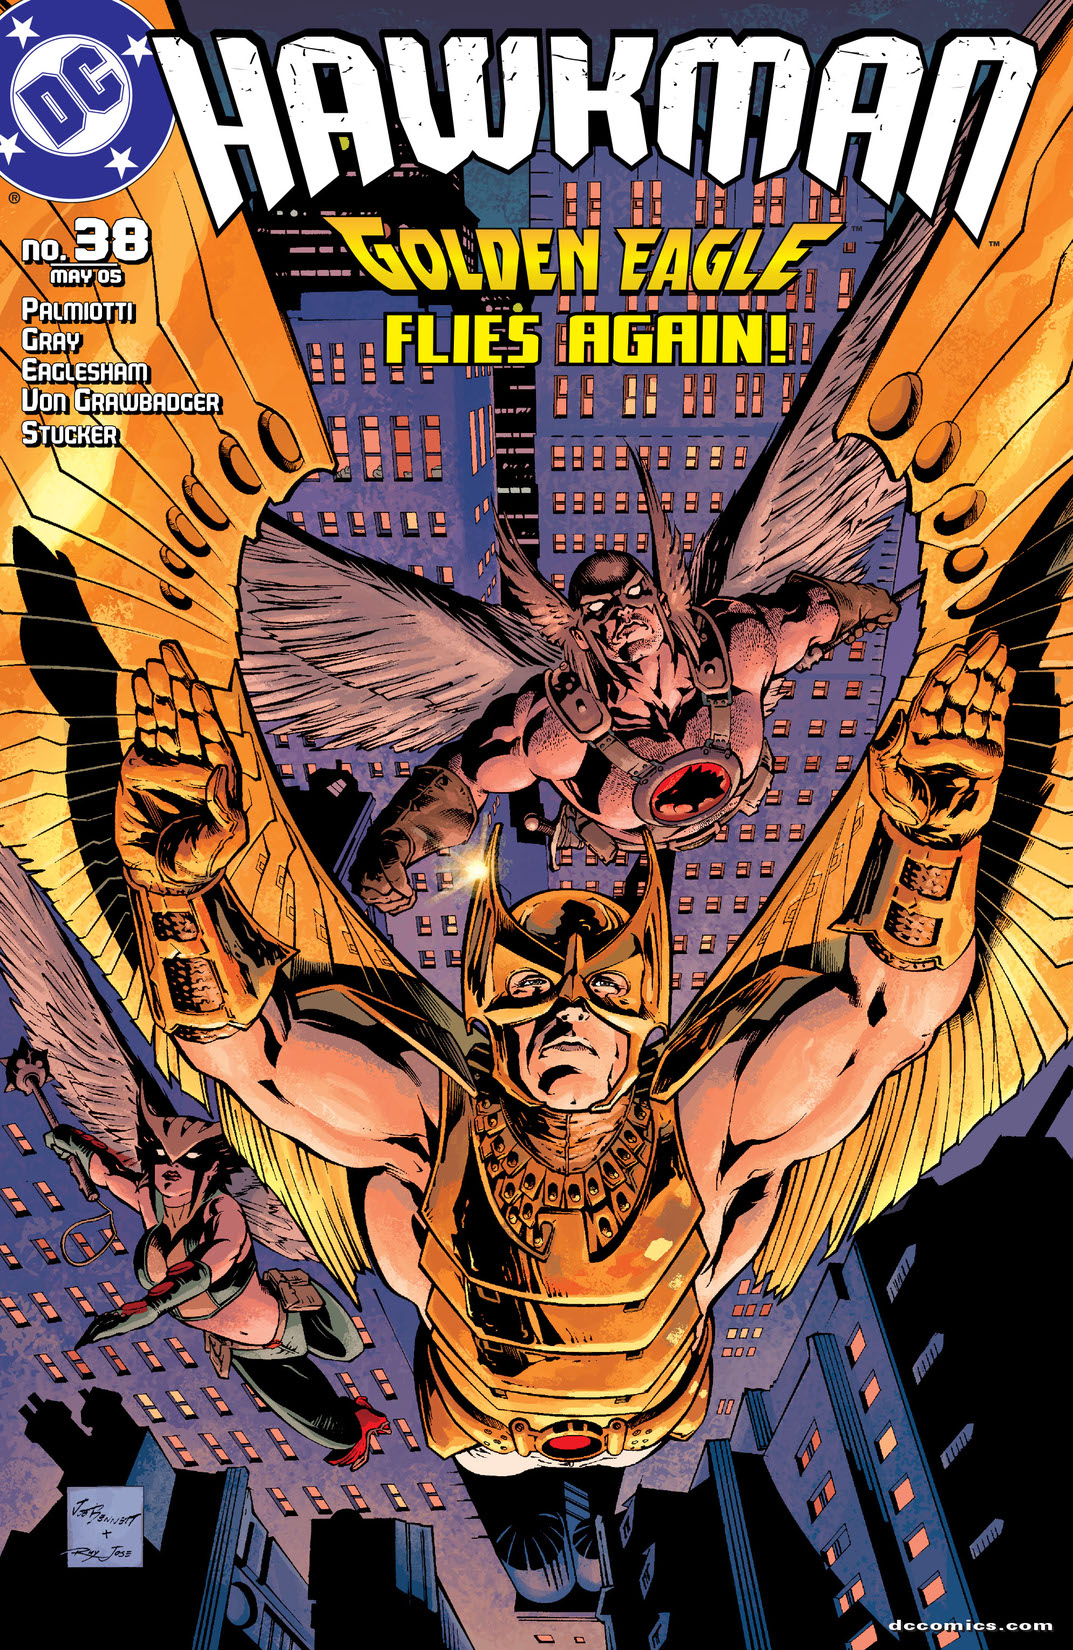 Hawkman (2002-) #38 preview images